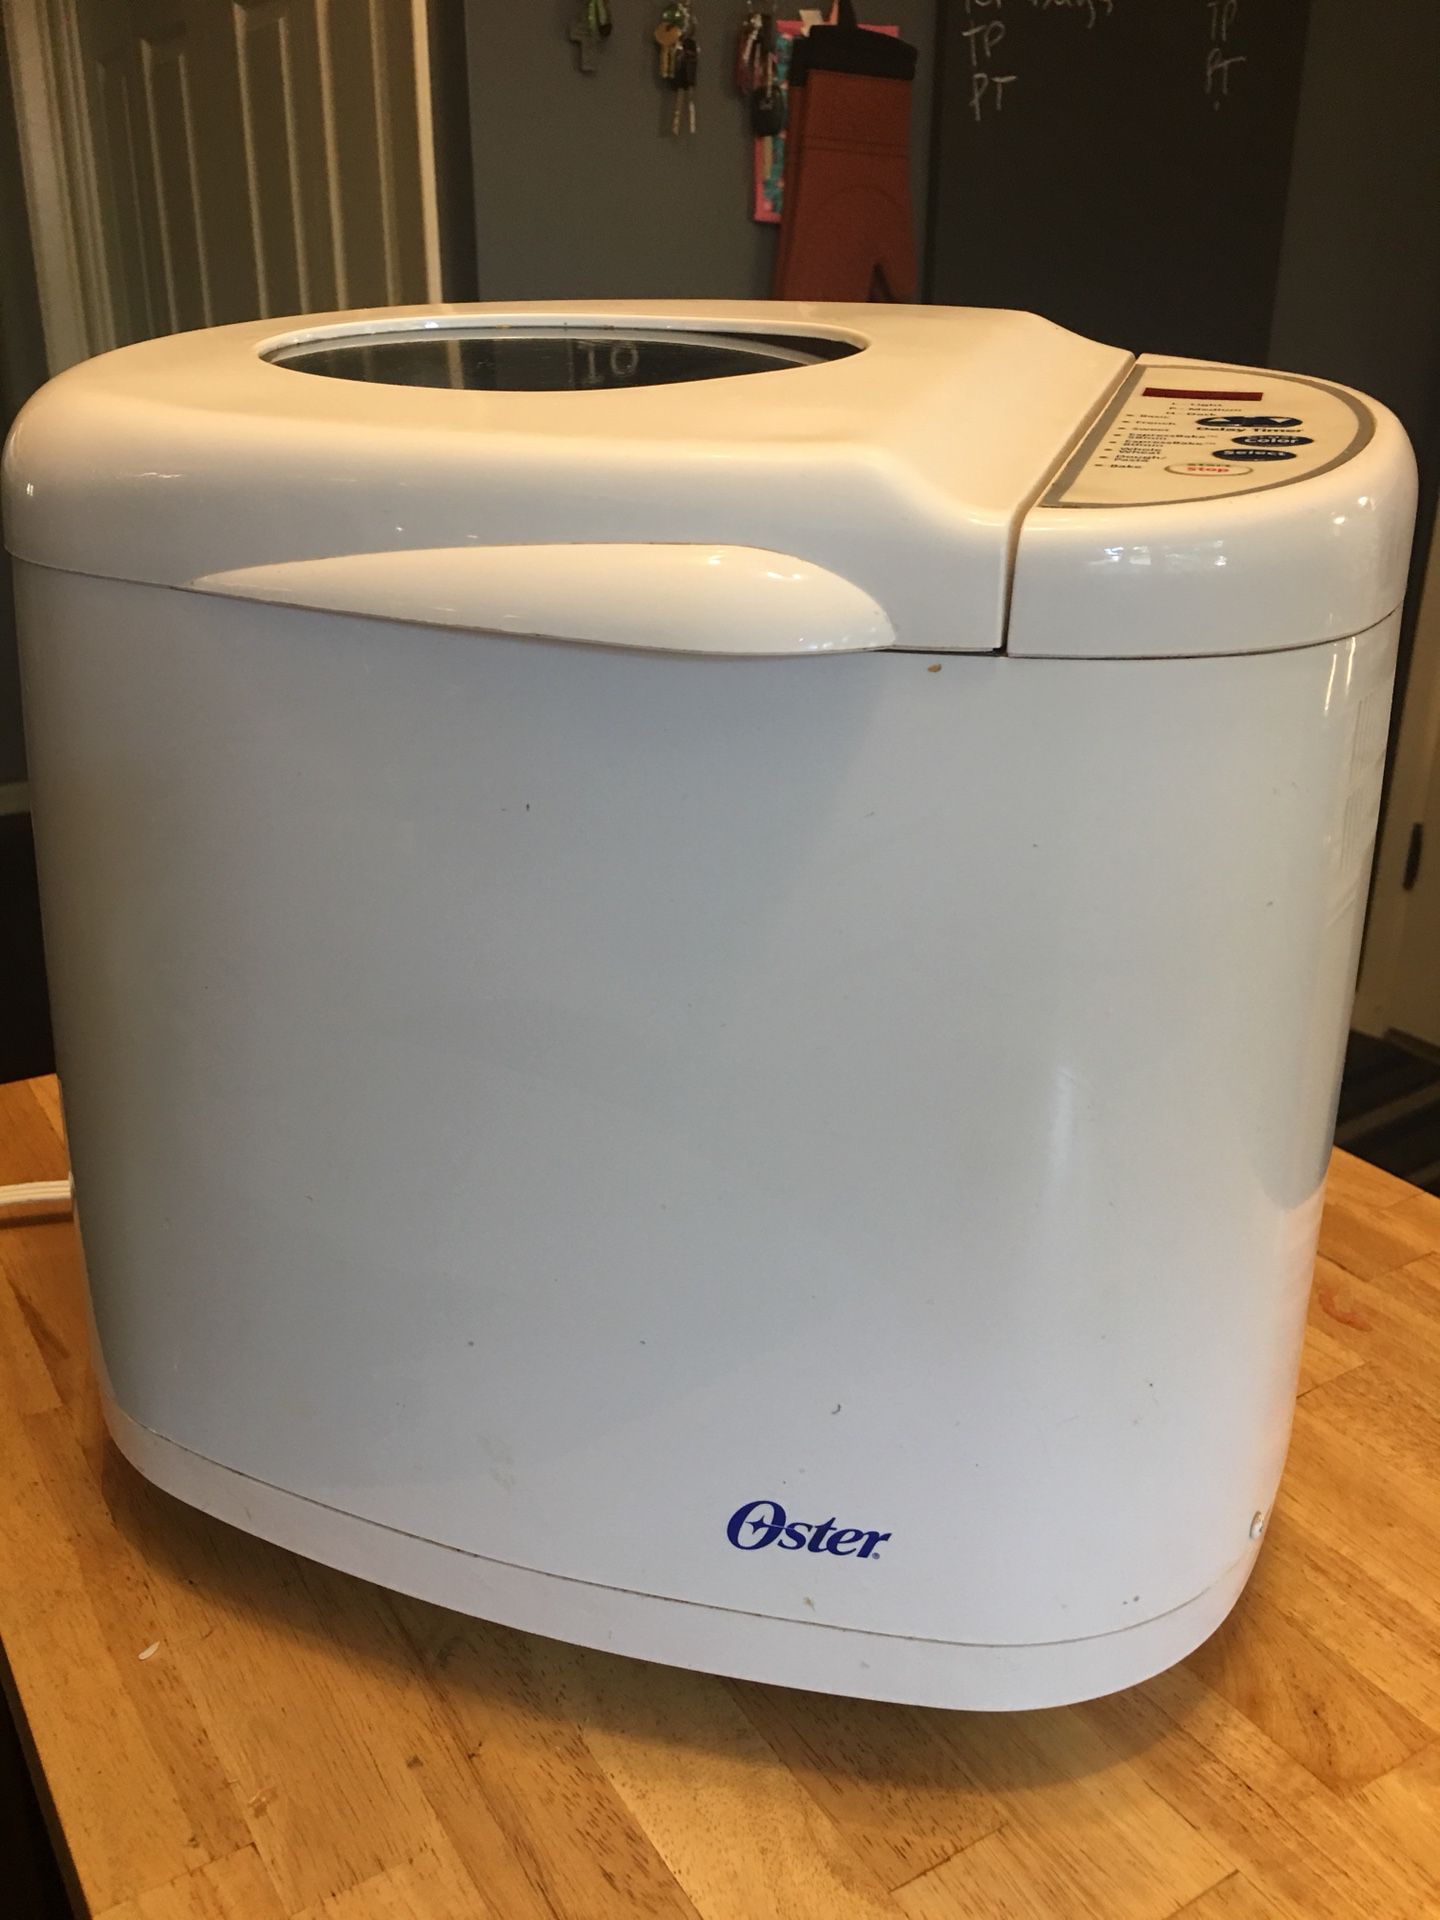 Oster bread and dough maker